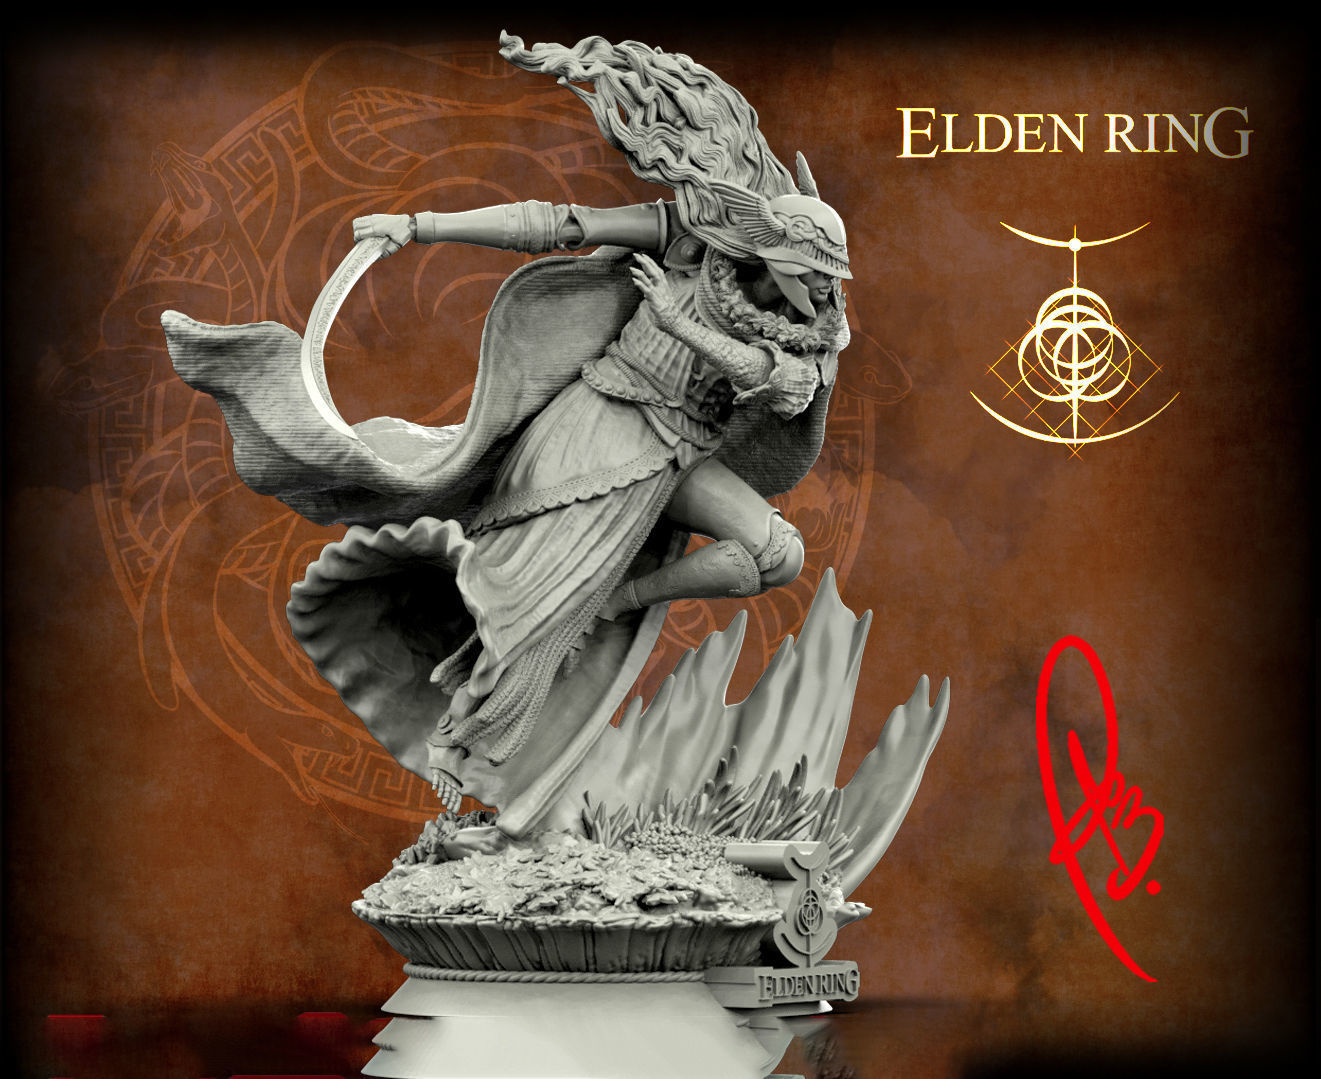 Image of the game elden ring with the character malenia